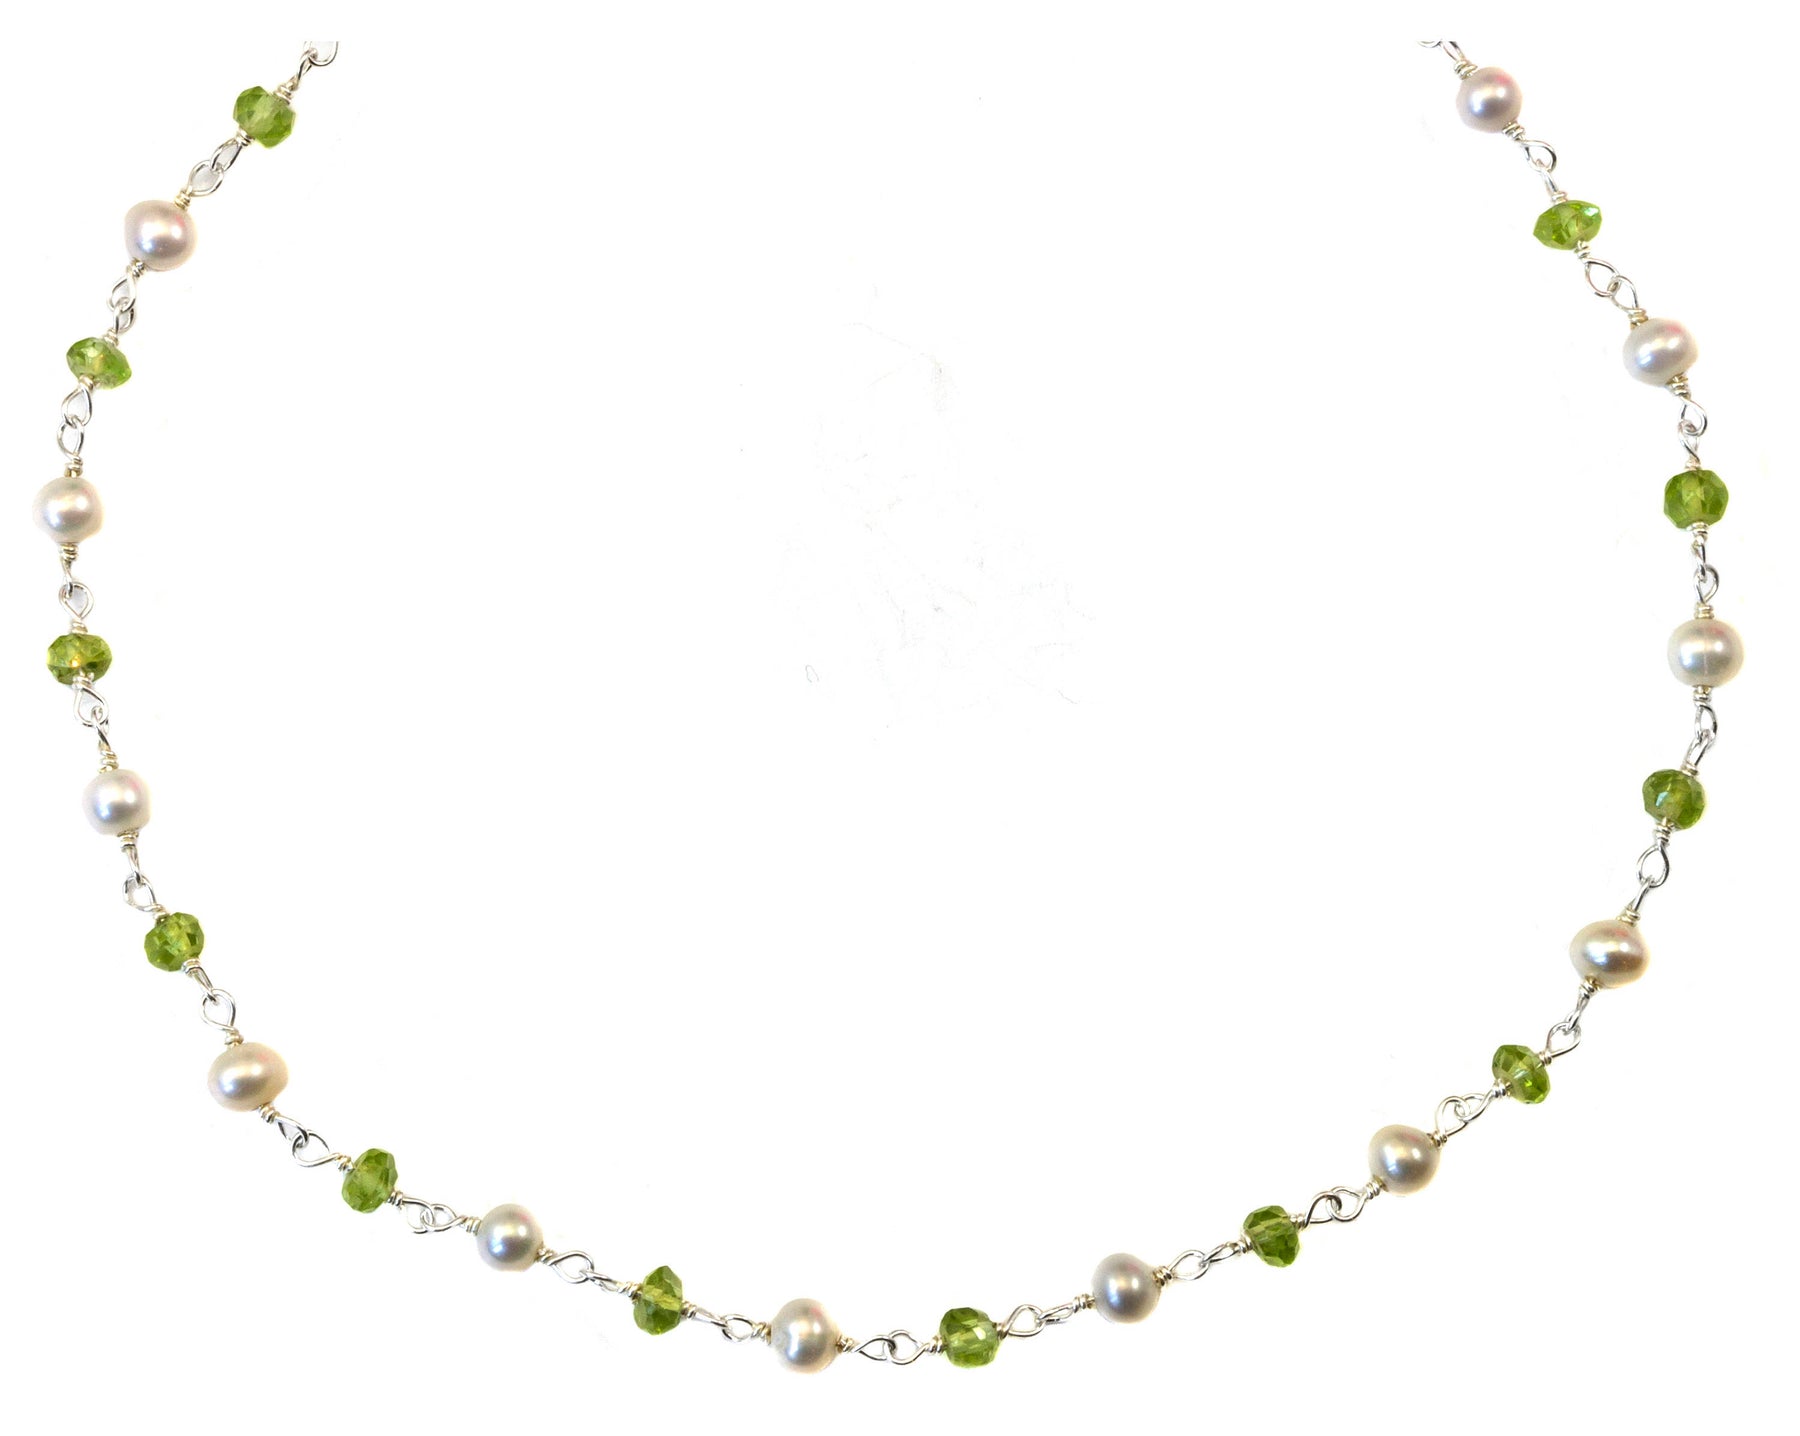 Peridot and Pearl necklace - Have a mooch